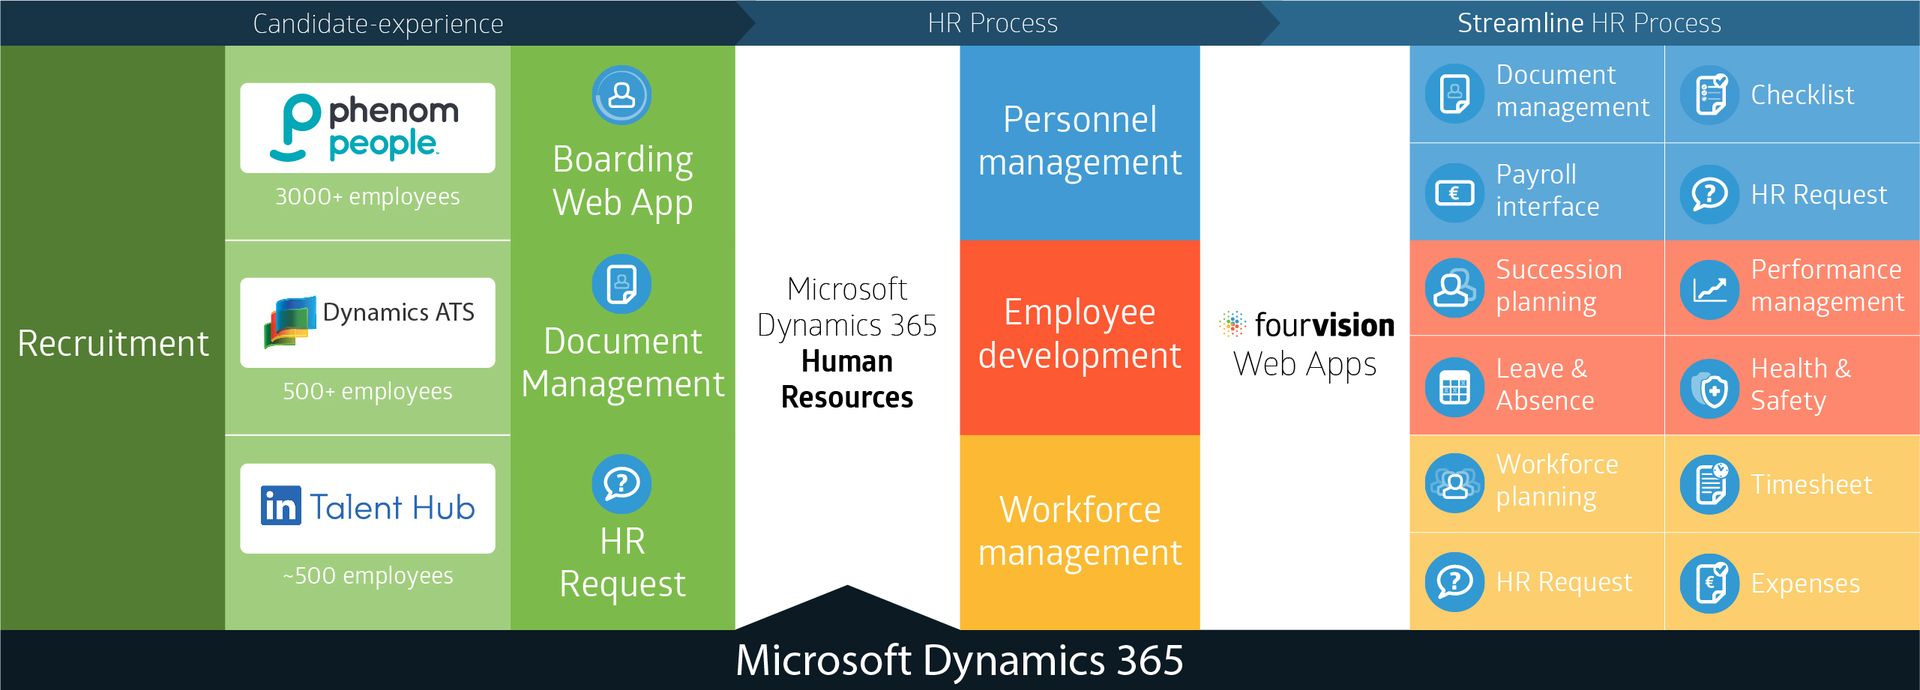 FourVision Solutions And Services Microsoft Dynamics 365 HR End-To-End